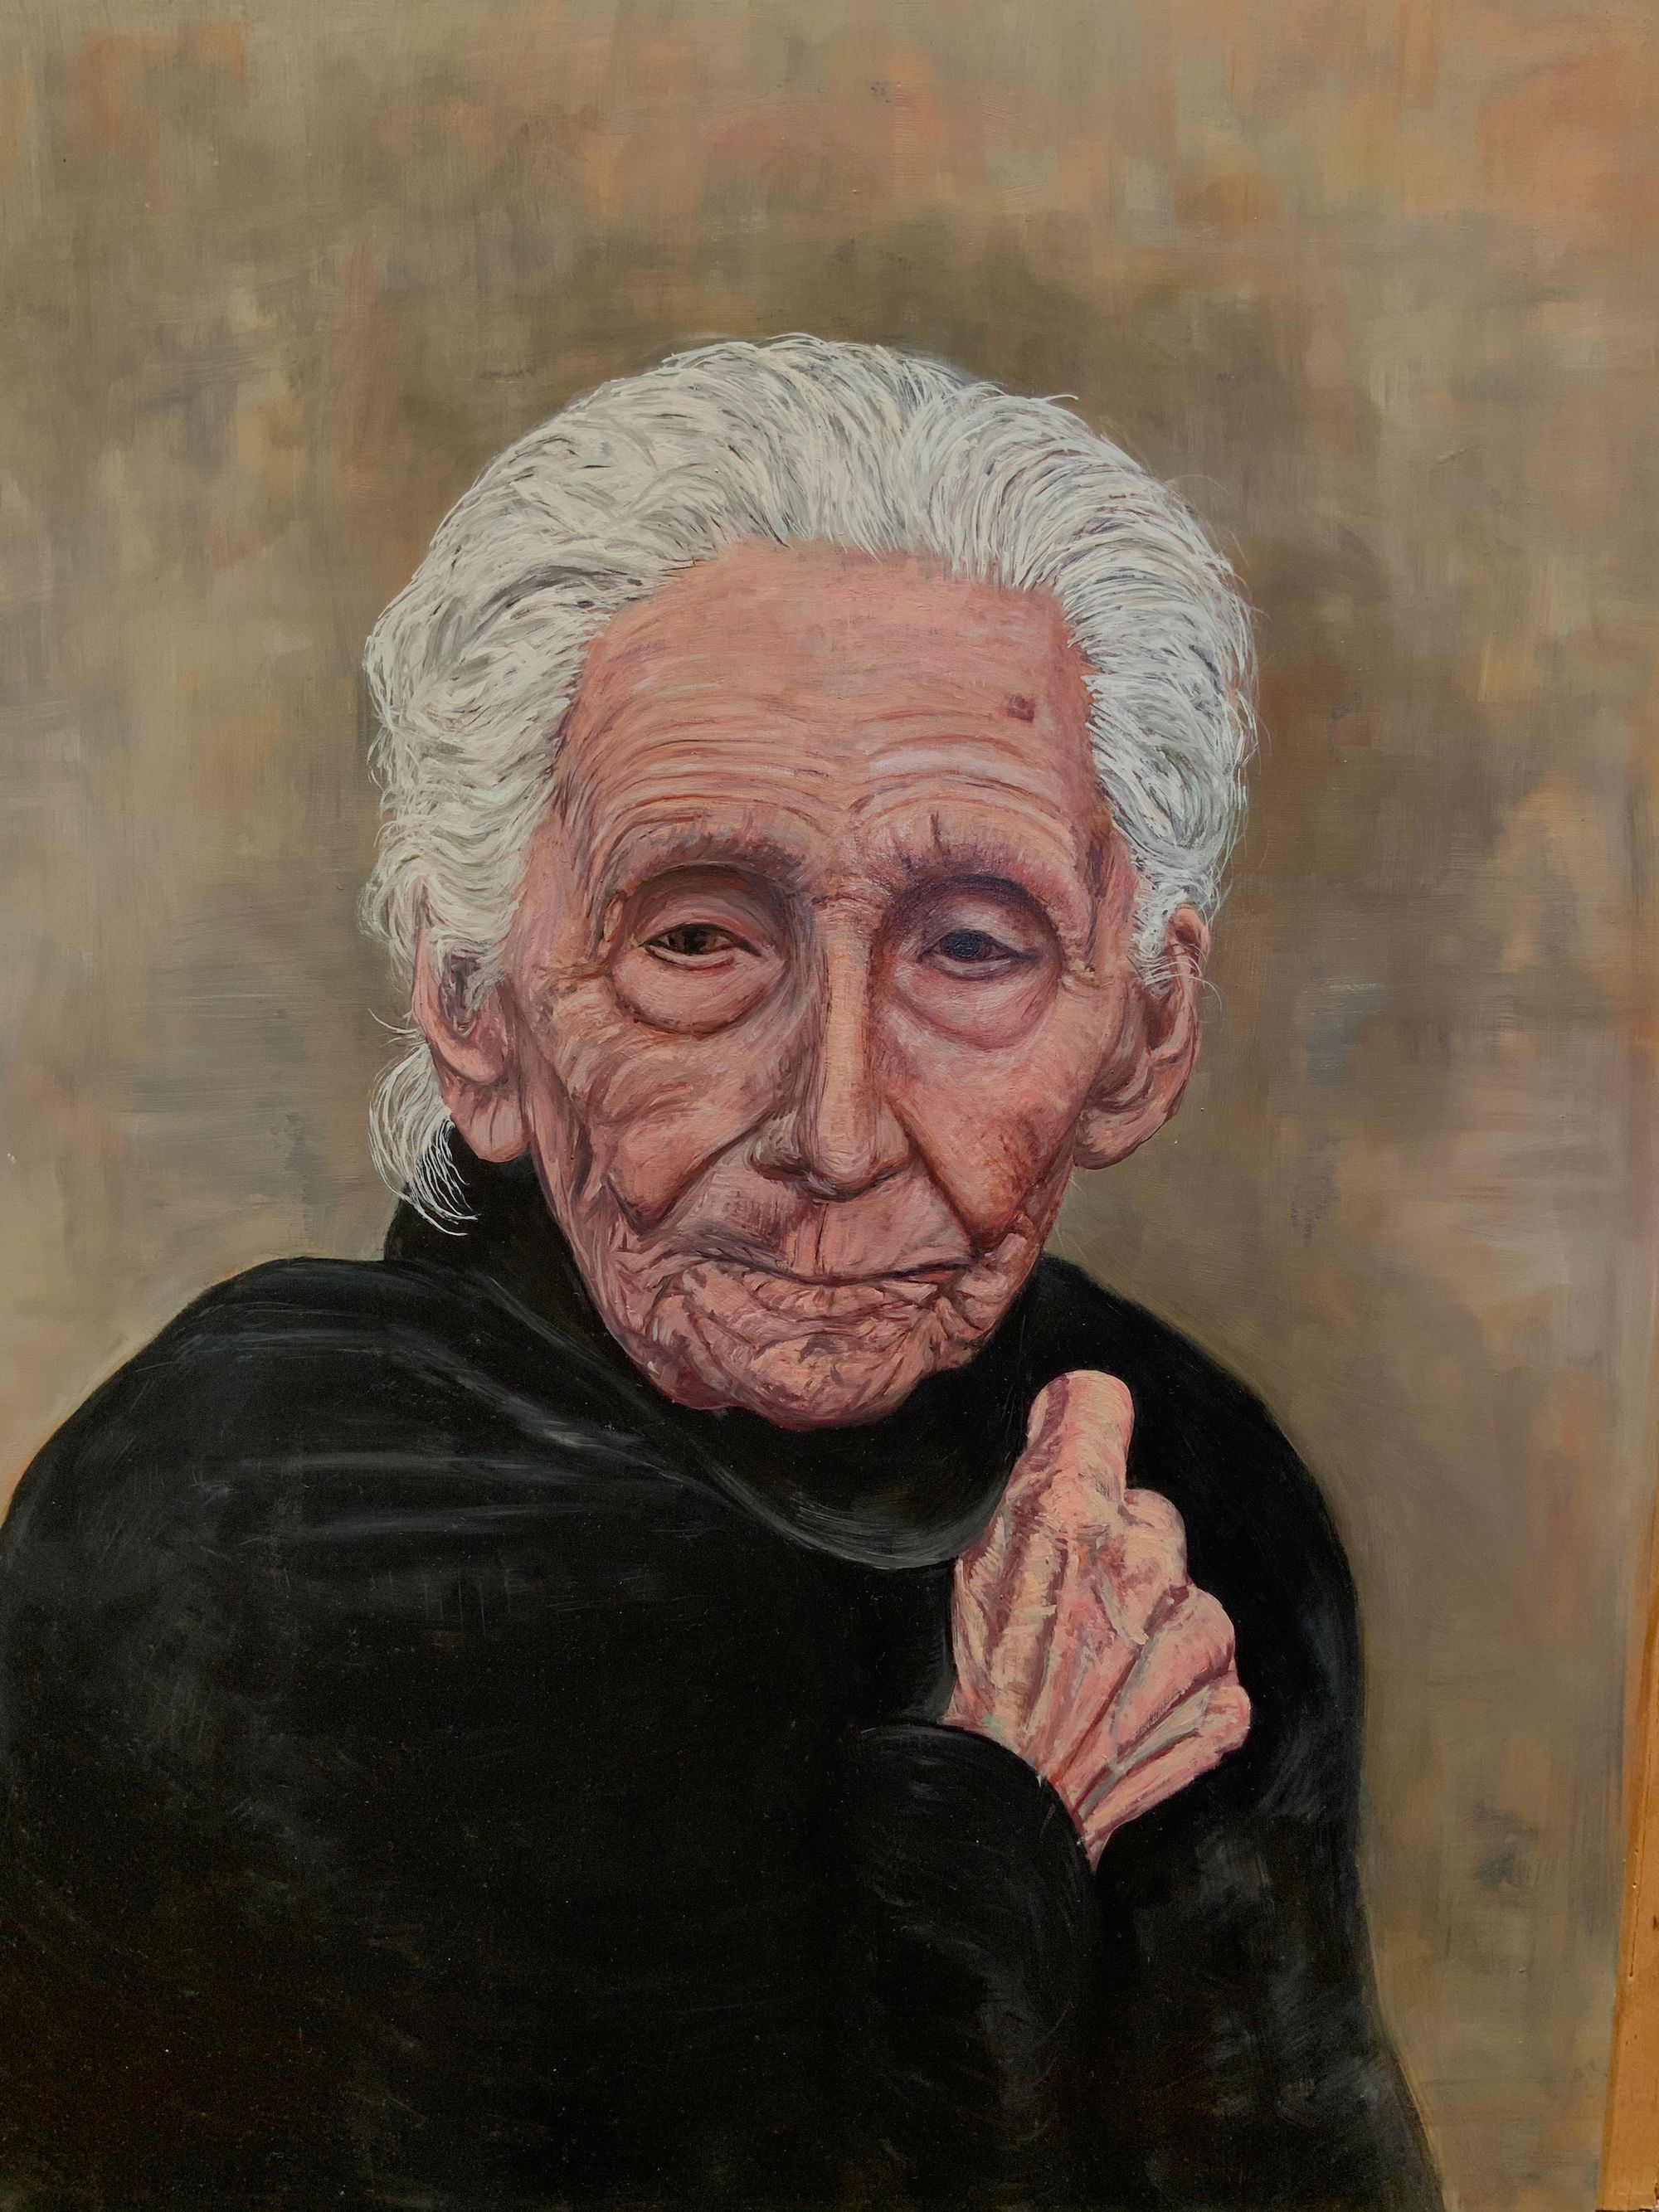 An old woman with weathered face looks slightly down while clutching her hand to her shoulder holding a shawl around her.